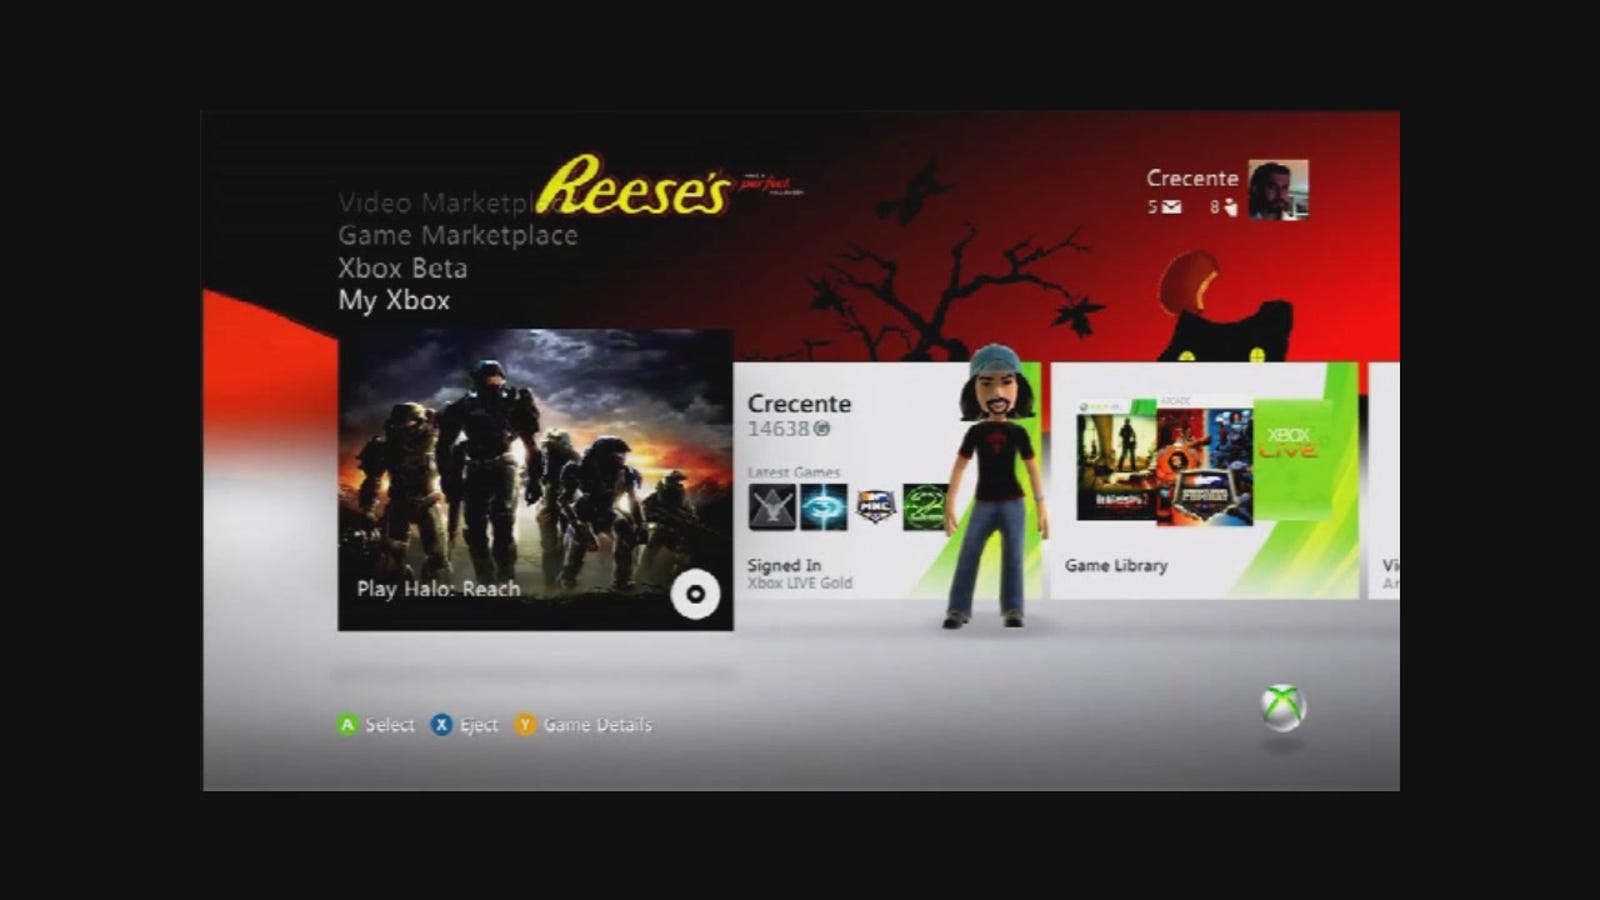 Finally, You Can Search on the Xbox 360's Netflix